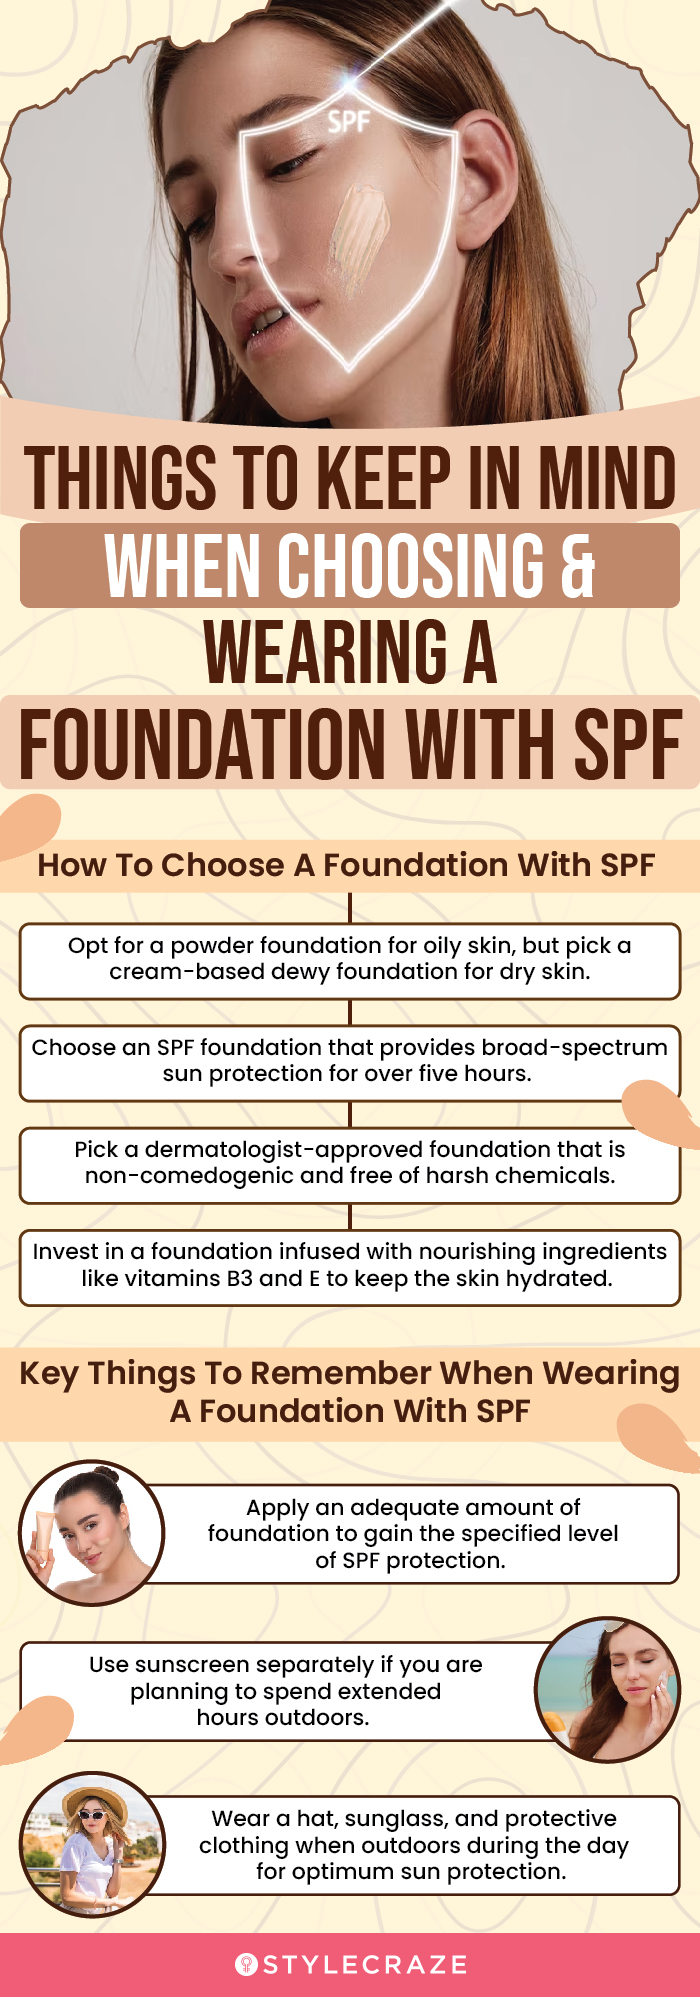 Things To Keep In Mind When Choosing & Wearing A Foundation With SPF (infographic)